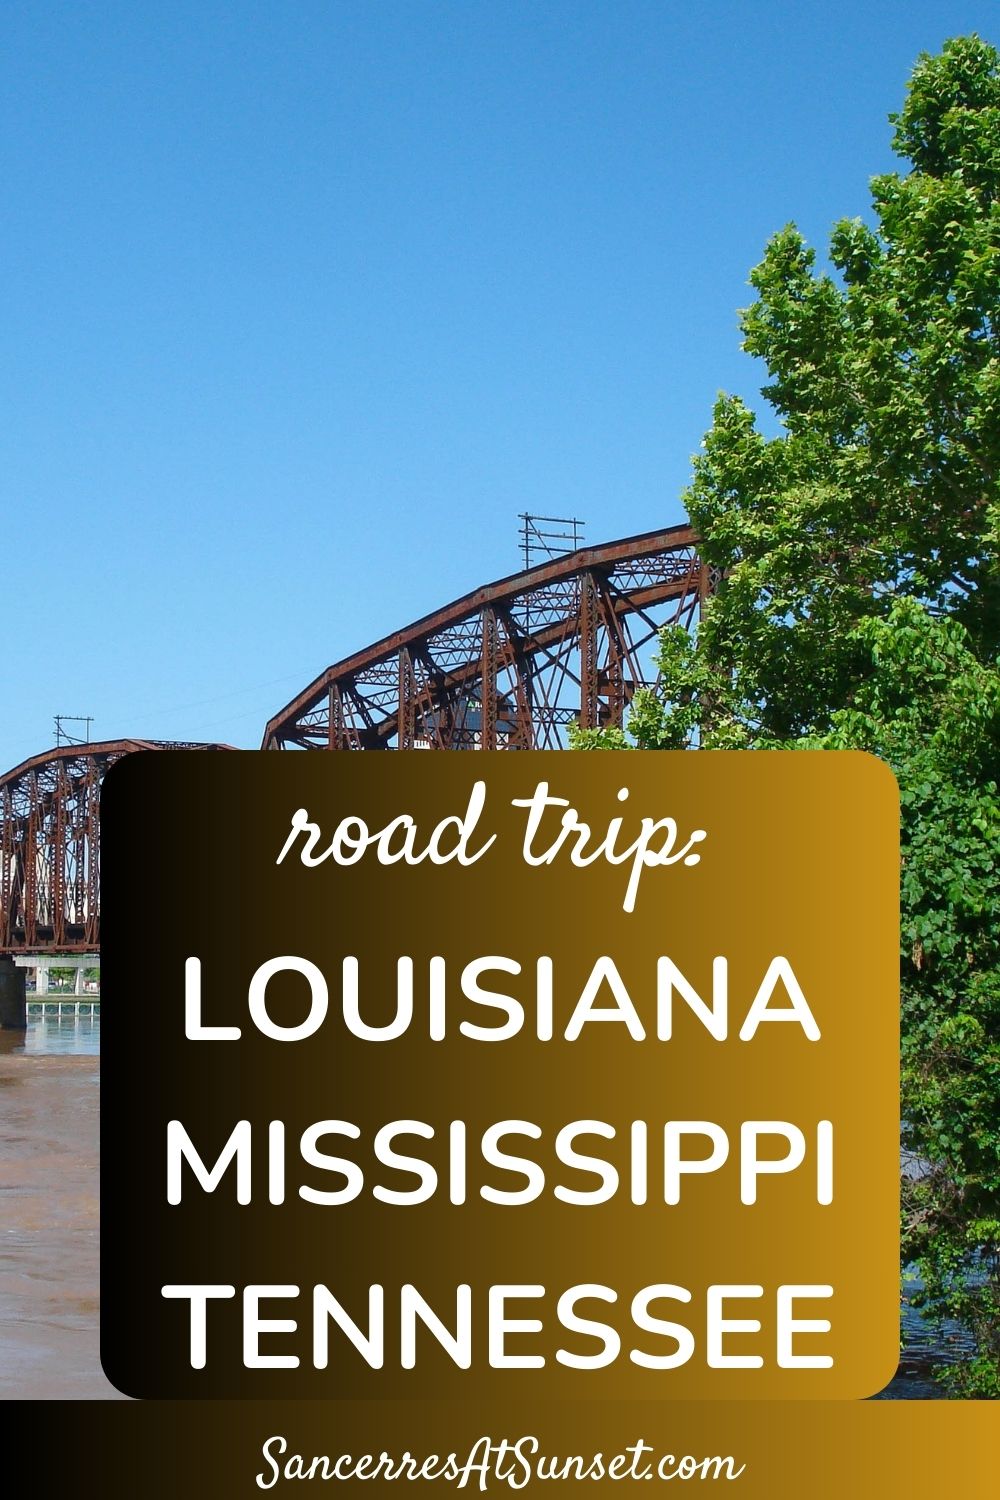 Louisiana to Tennessee -- part 5 of the great American road trip